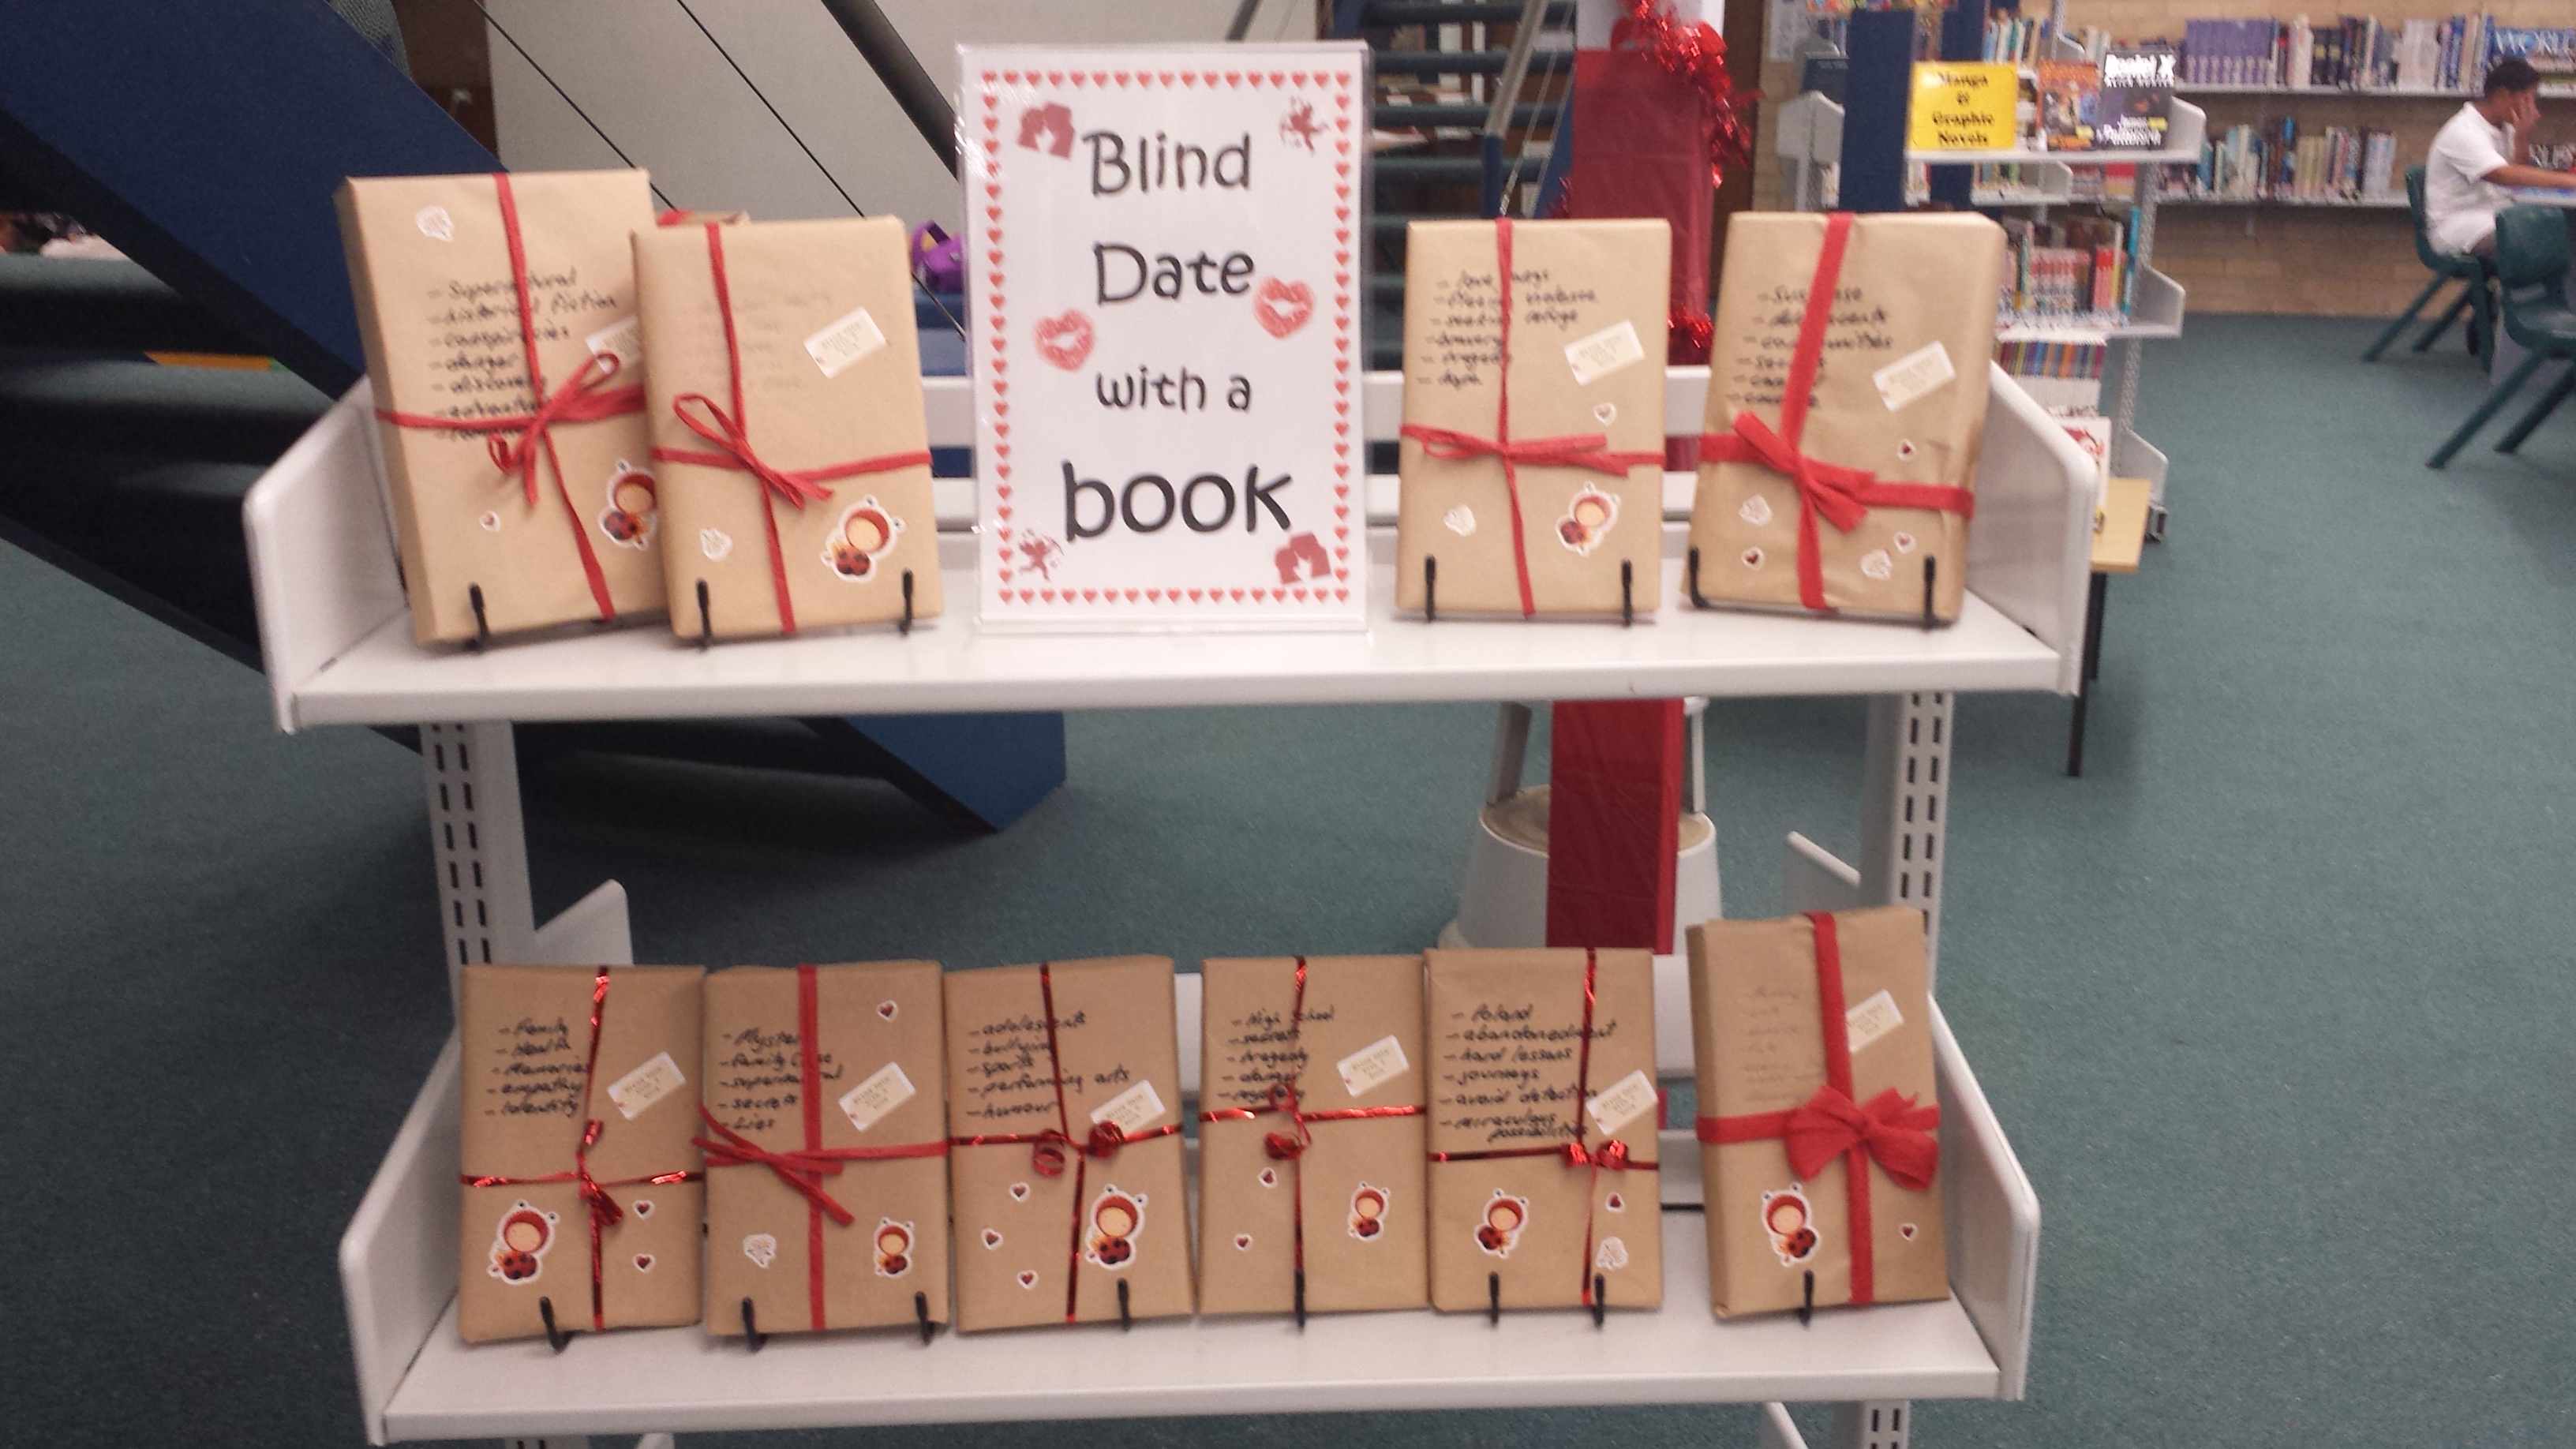 Blind date with a book display, books wrapped so you can't see their cover, you can only read a one sentence summary of the book.